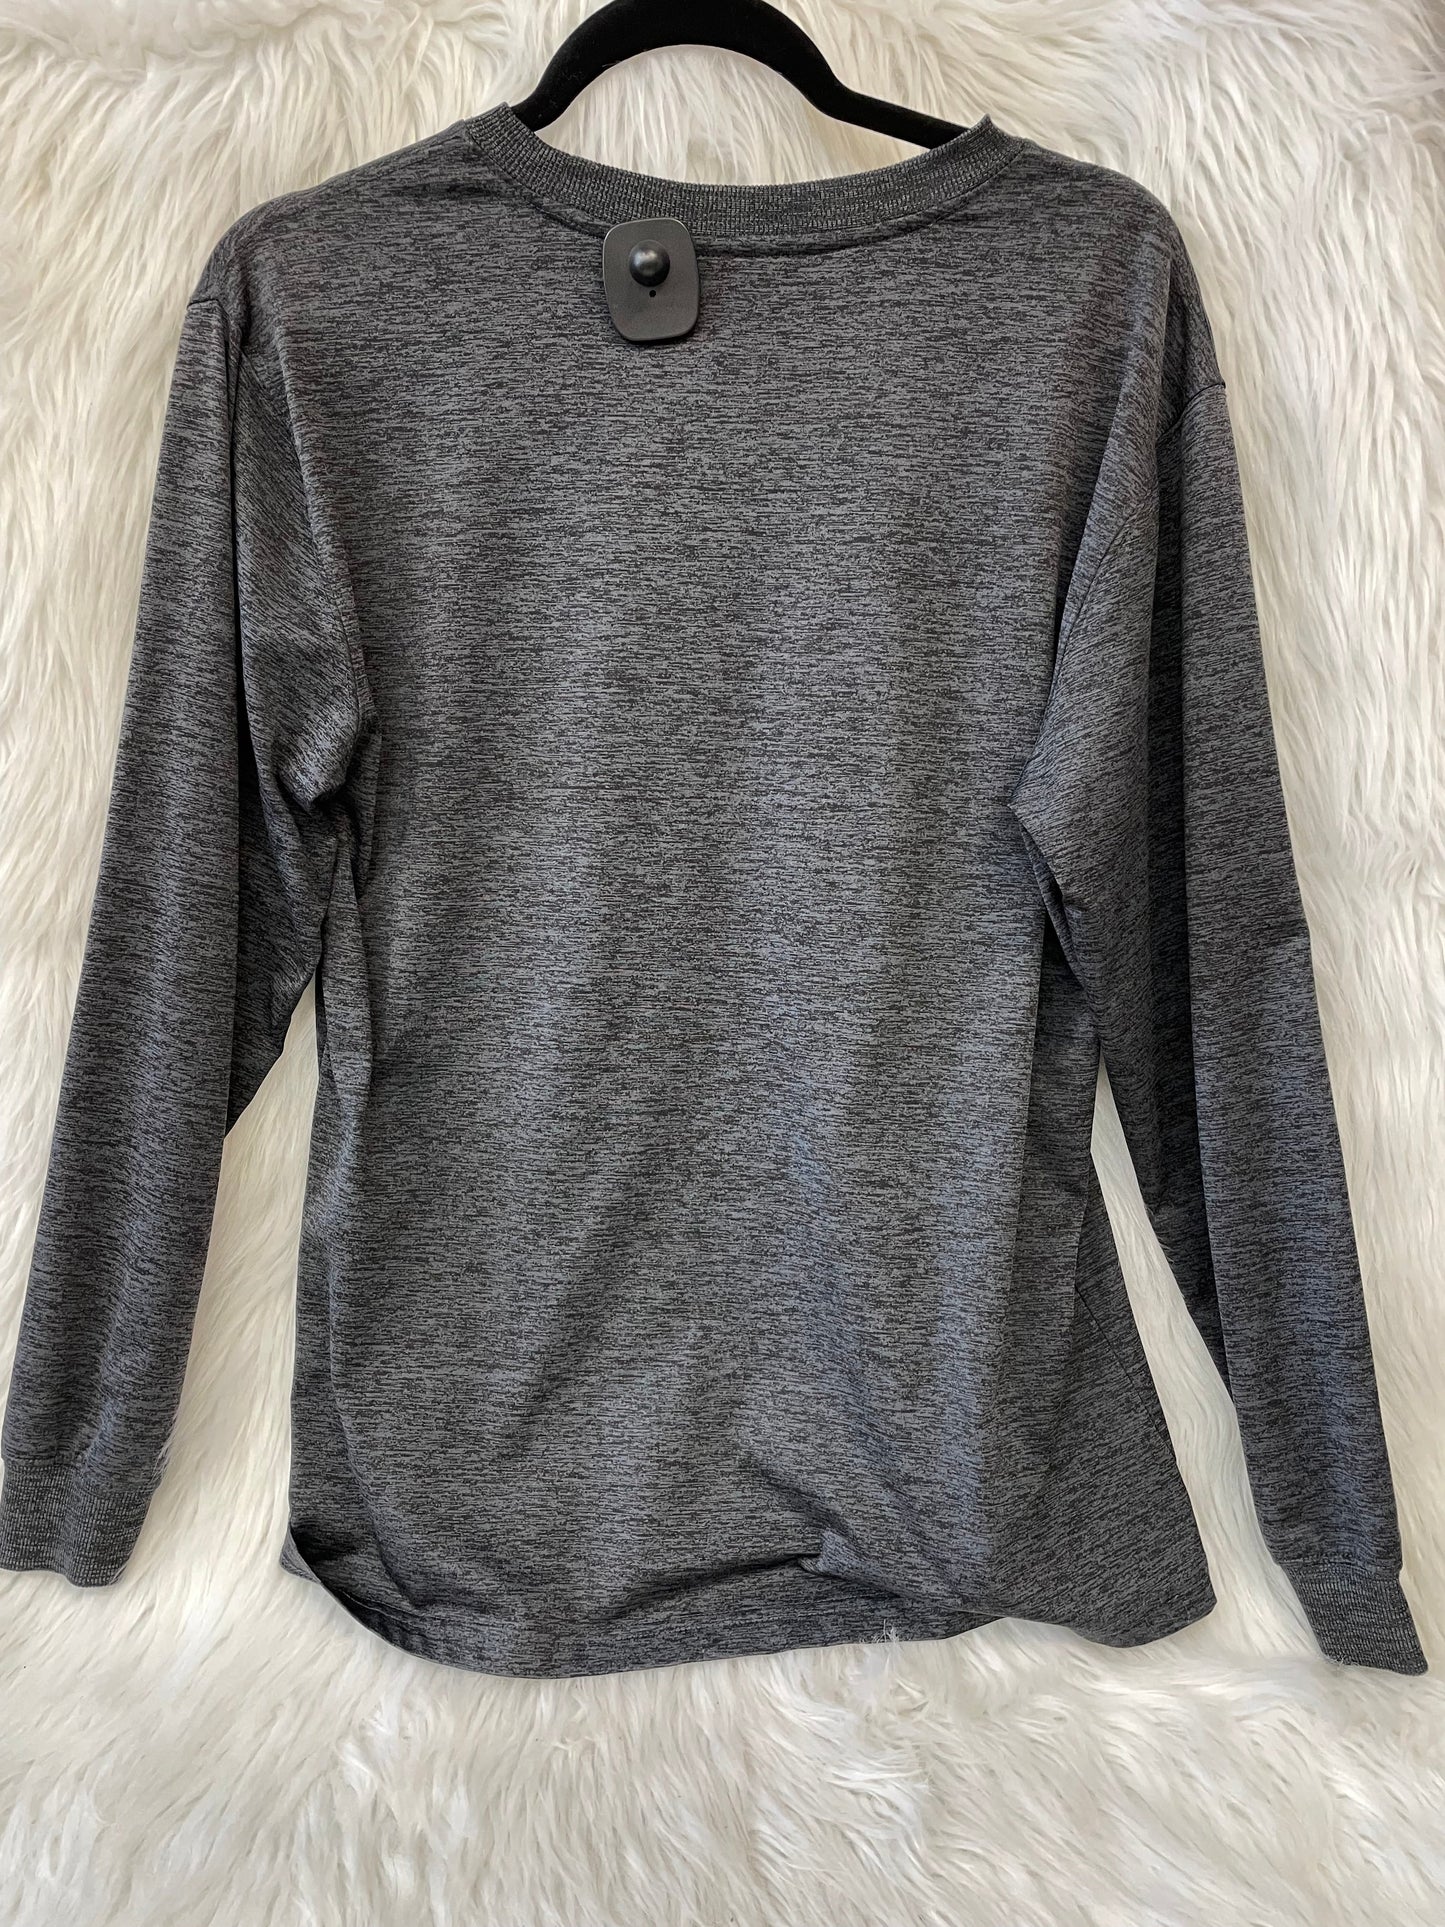 Grey Top Long Sleeve Basic Clothes Mentor, Size L